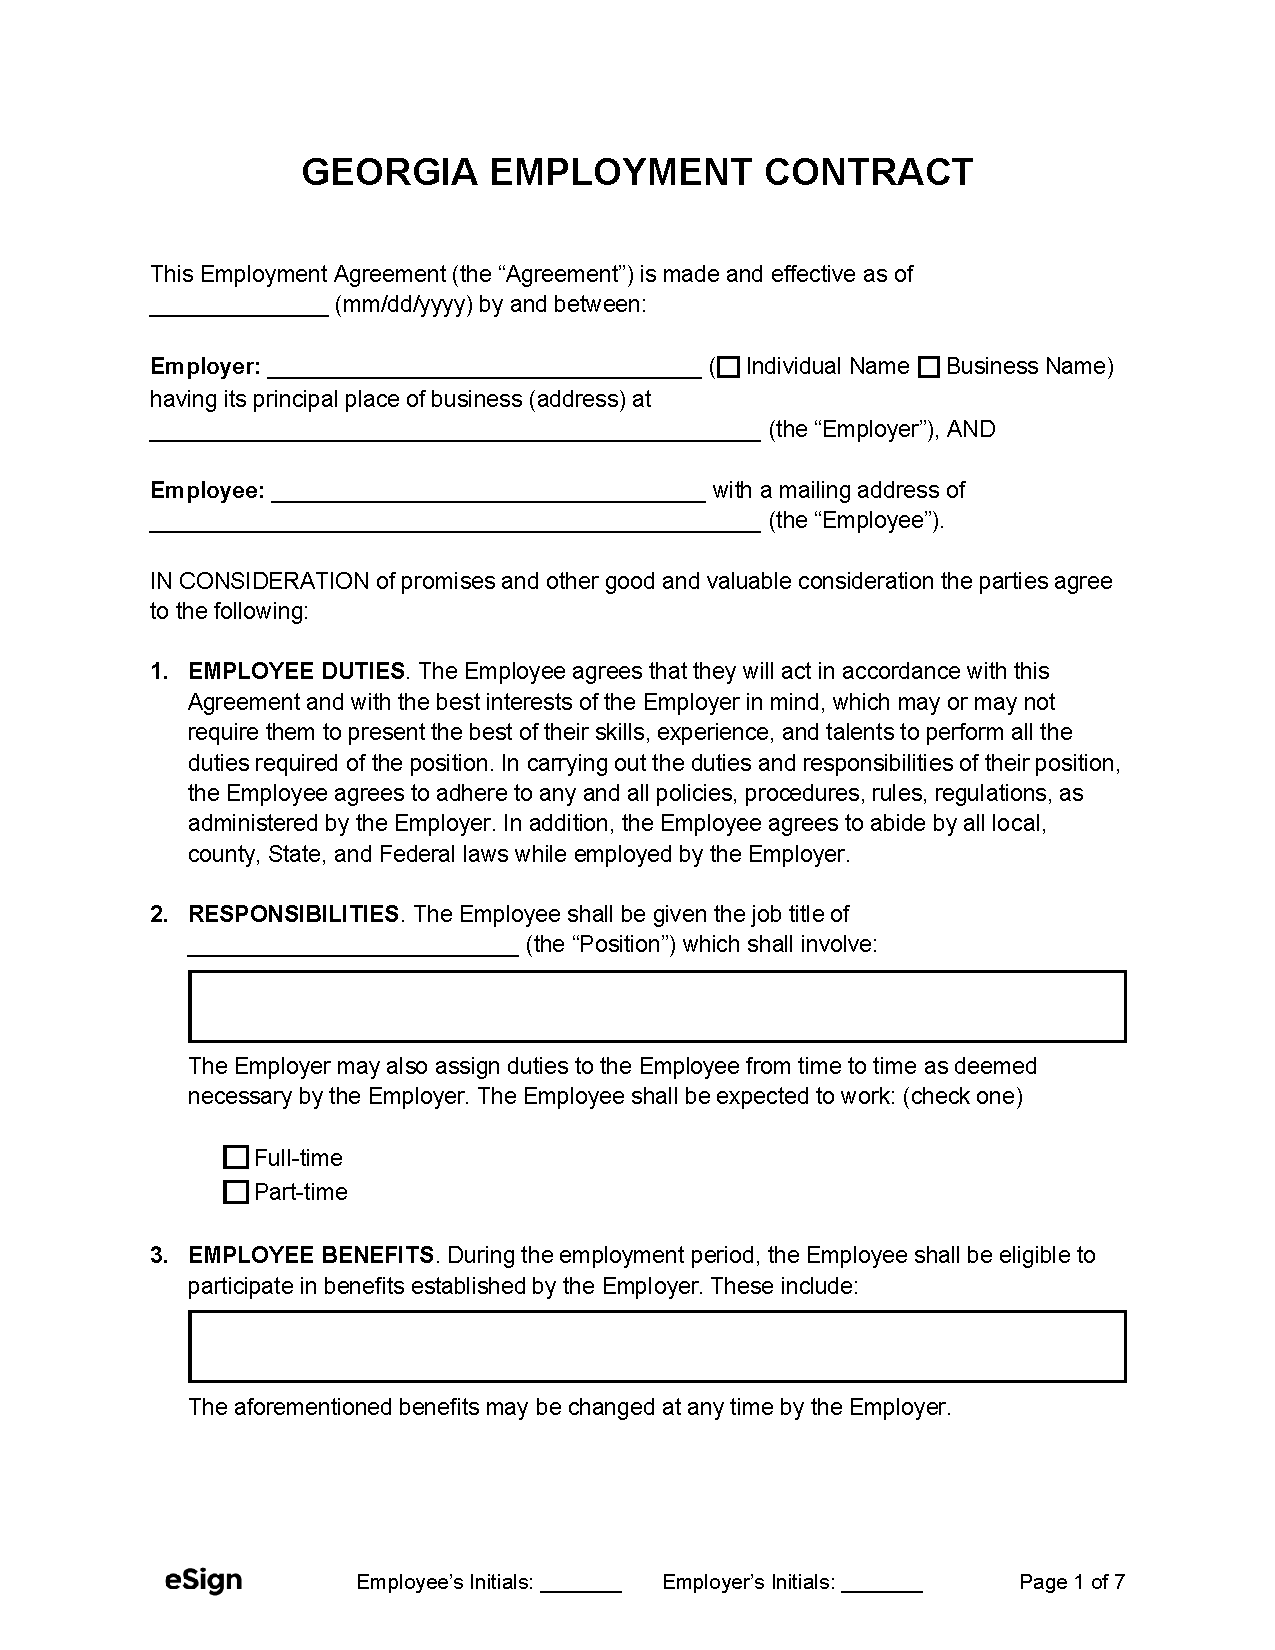 Employment Contract Template Georgia